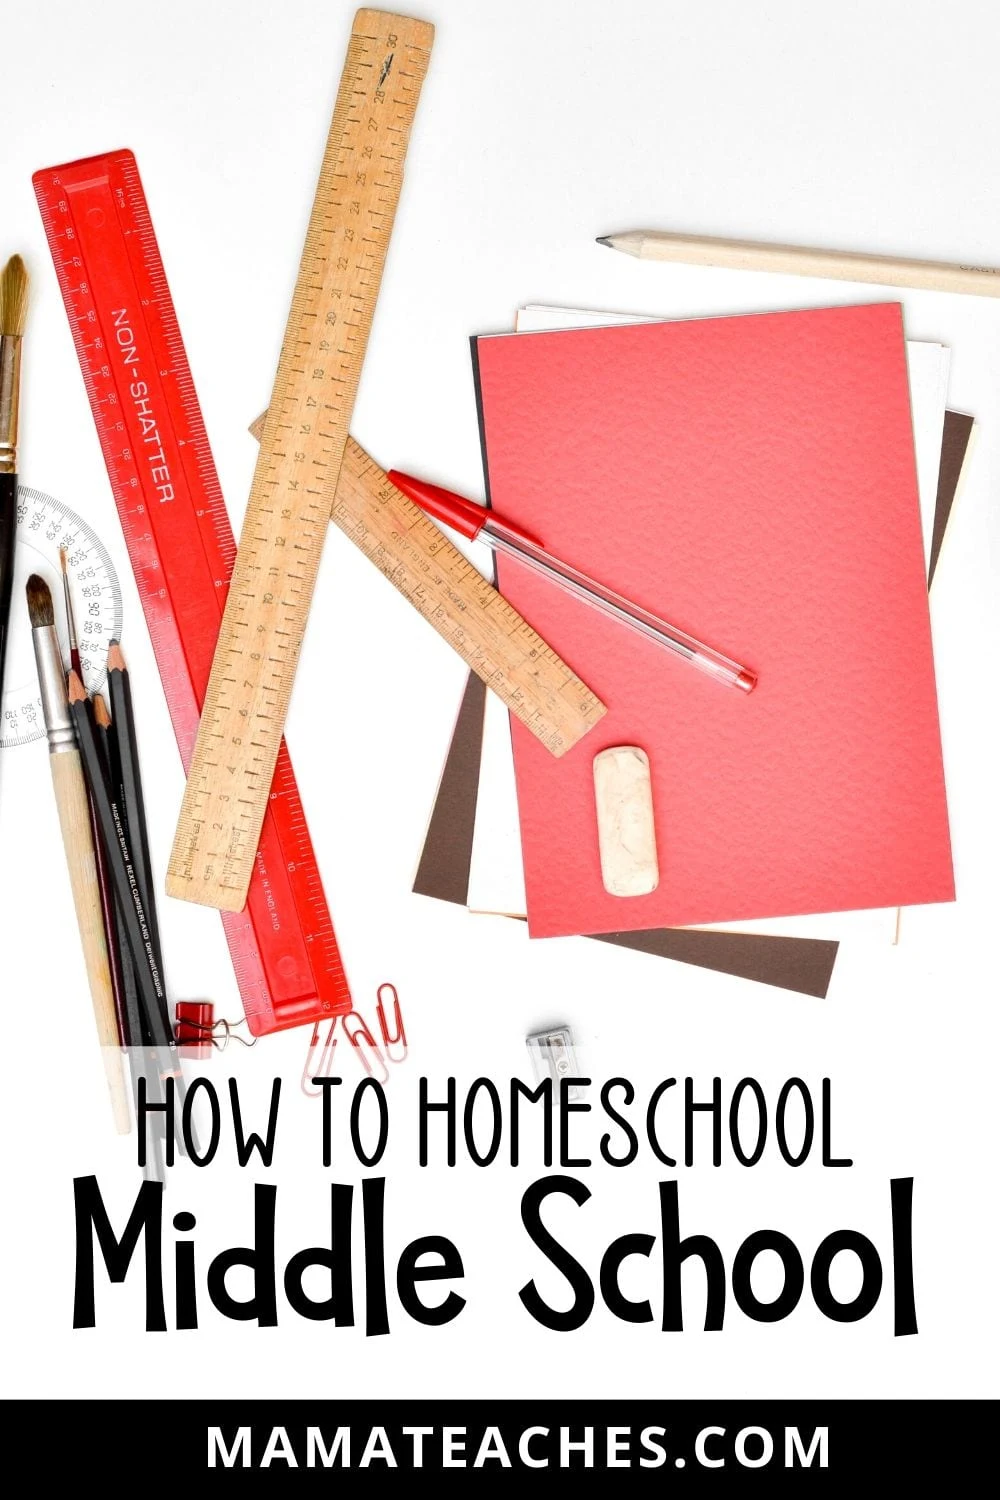 How to Homeschool Middle School - MamaTeaches.com